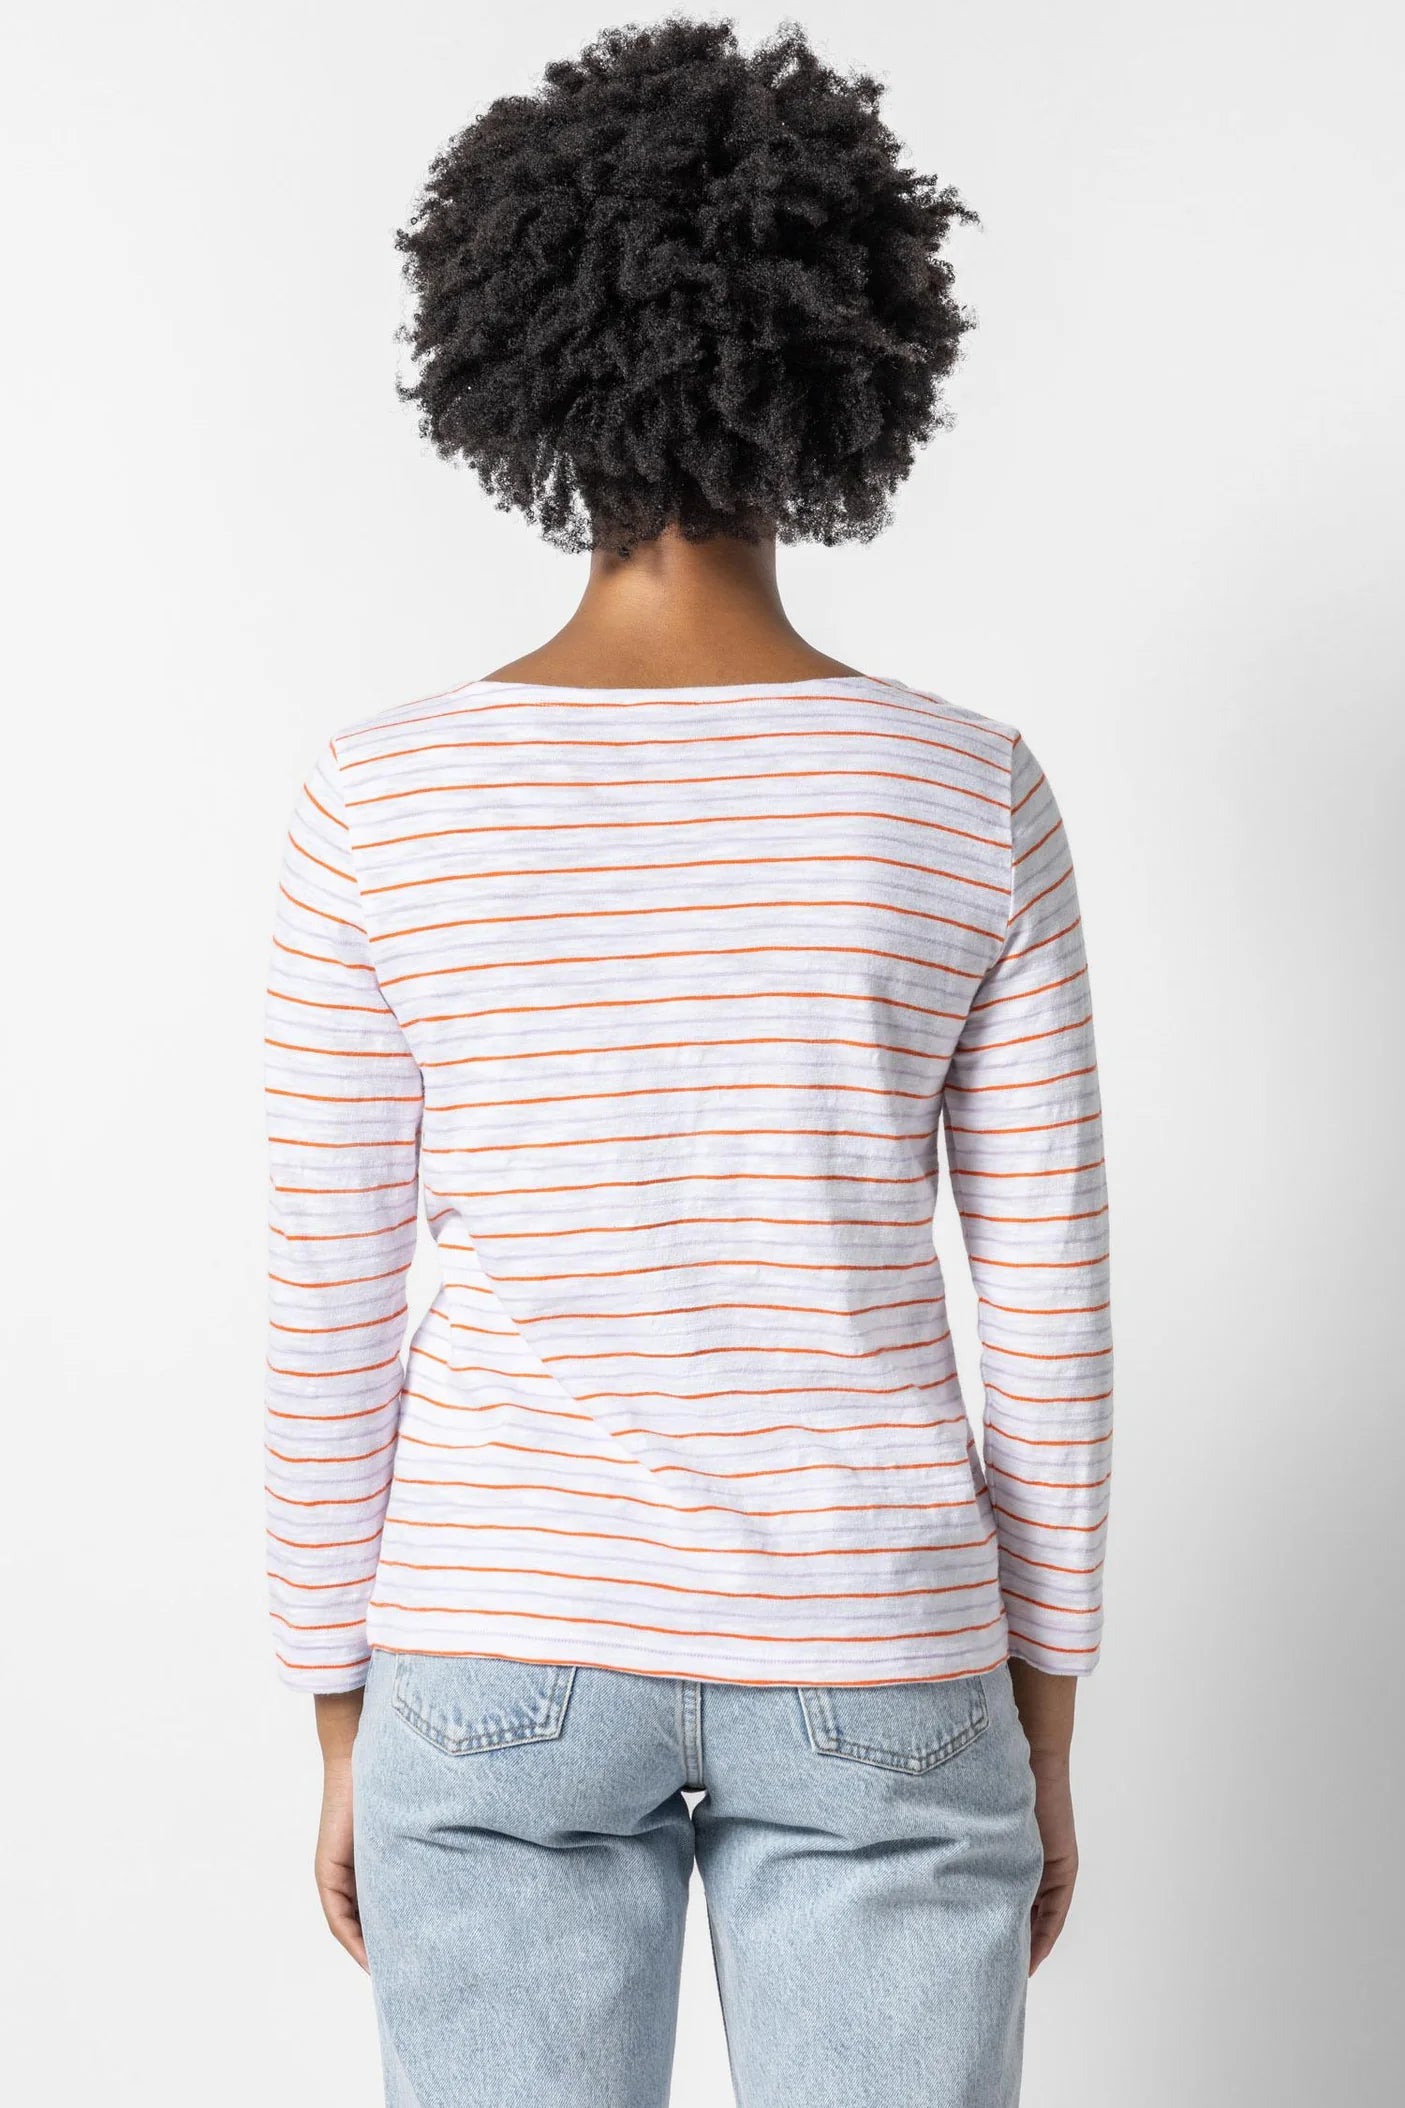 3/4 Sleeve Striped Boatneck in tangelo/lily by Lilla P